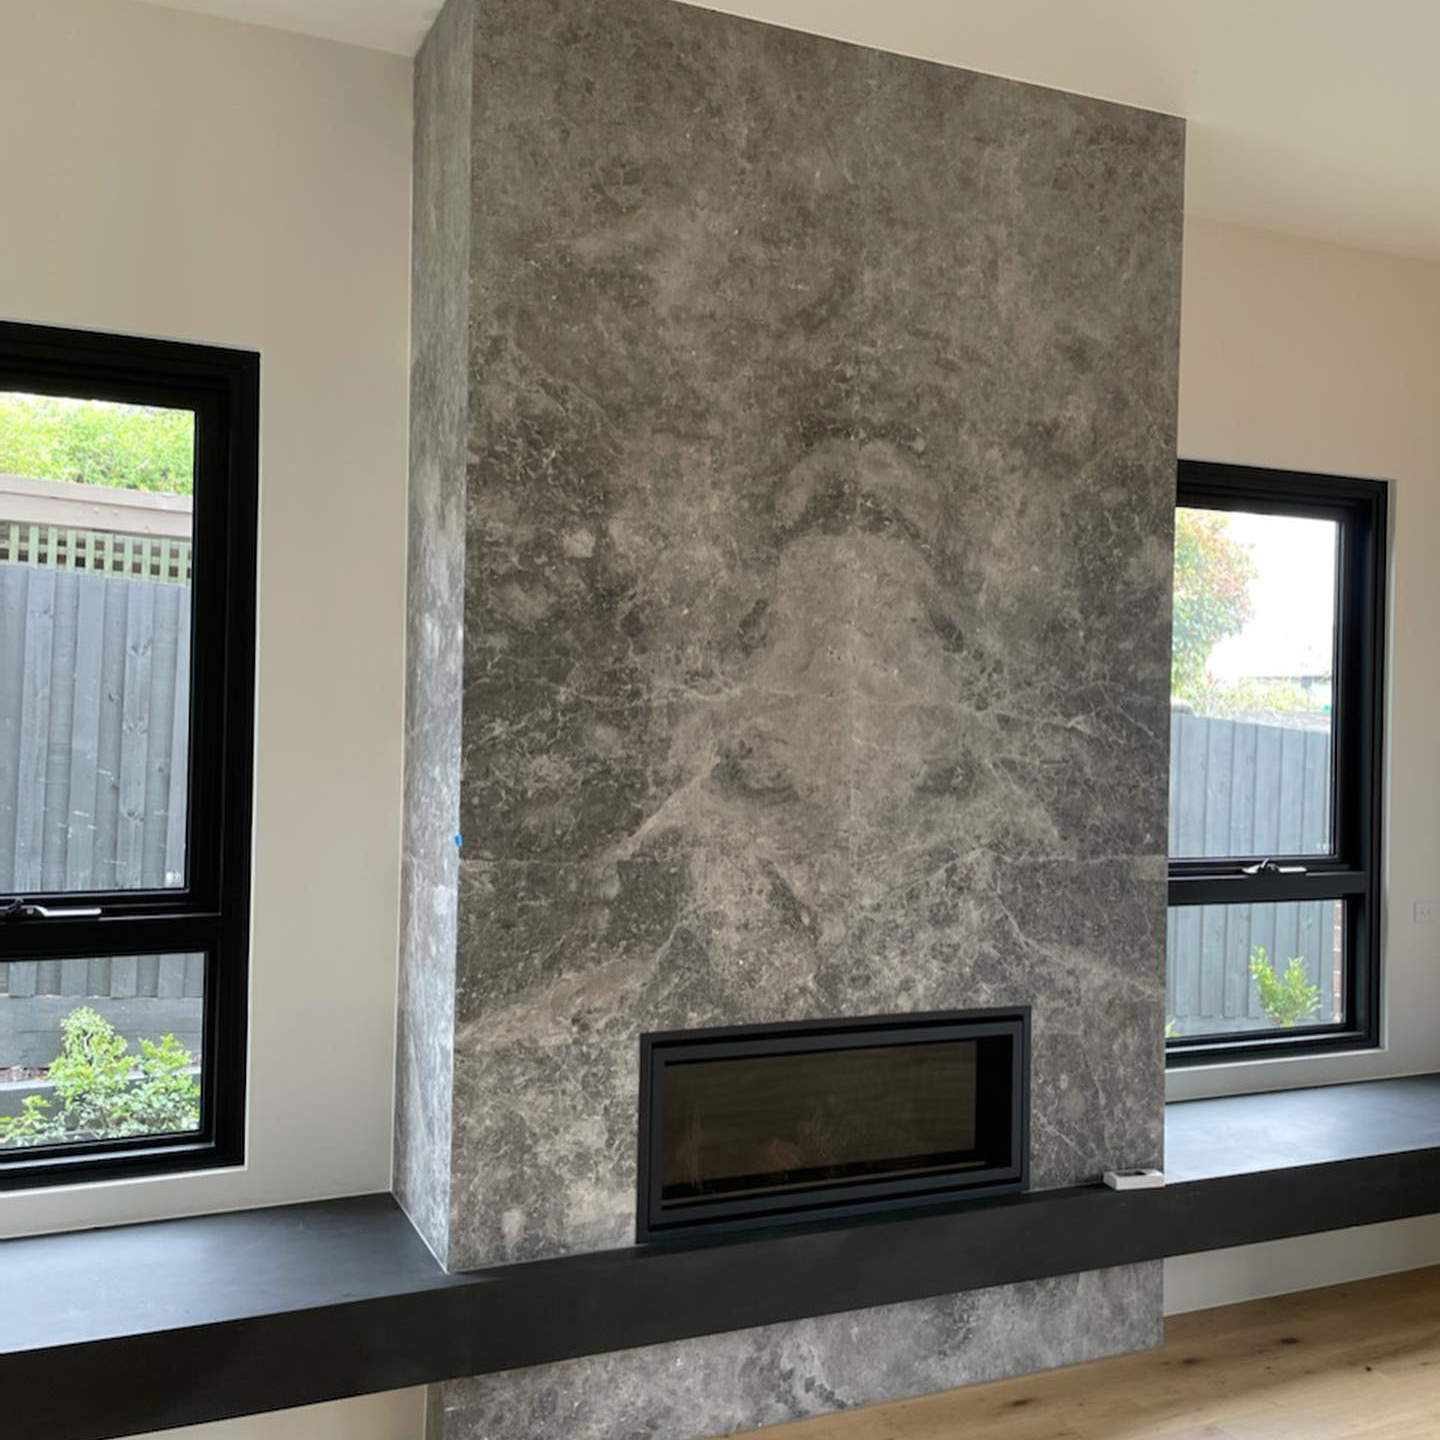 Modern fireplace with a tall, grey marble surround, flanked by two windows with black frames. The fireplace is set above a sleek black bench that runs along the length of the wall. The room has light wood flooring and a minimalist design, emphasizing clean lines and natural materials.